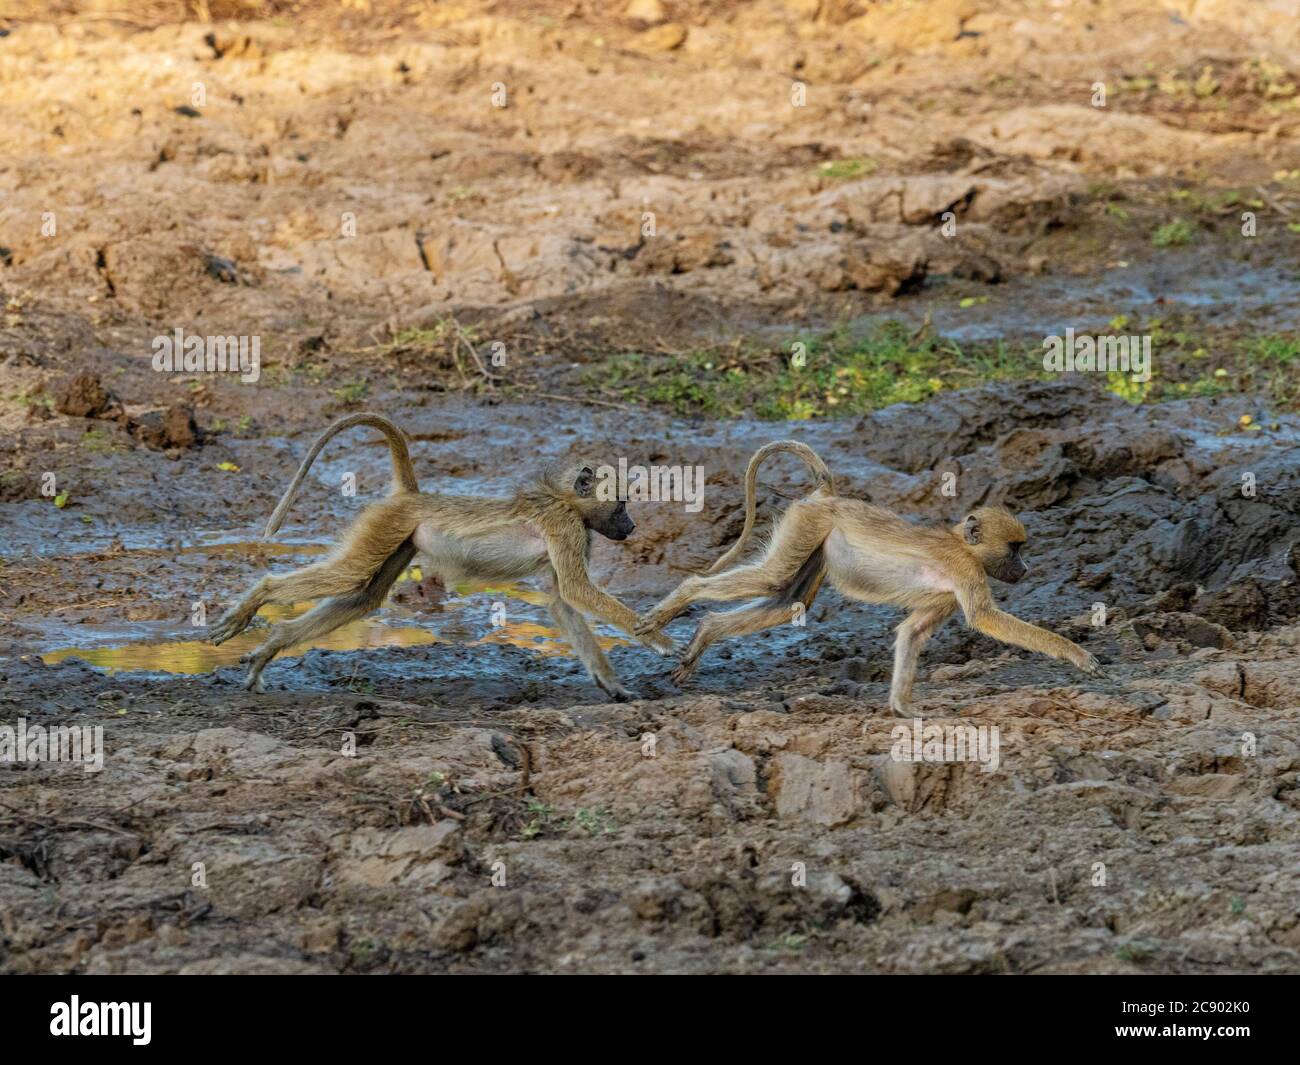 Young yellow baboons, Papio cynocephalus, running in South Luangwa National Park, Zambia Stock Photo